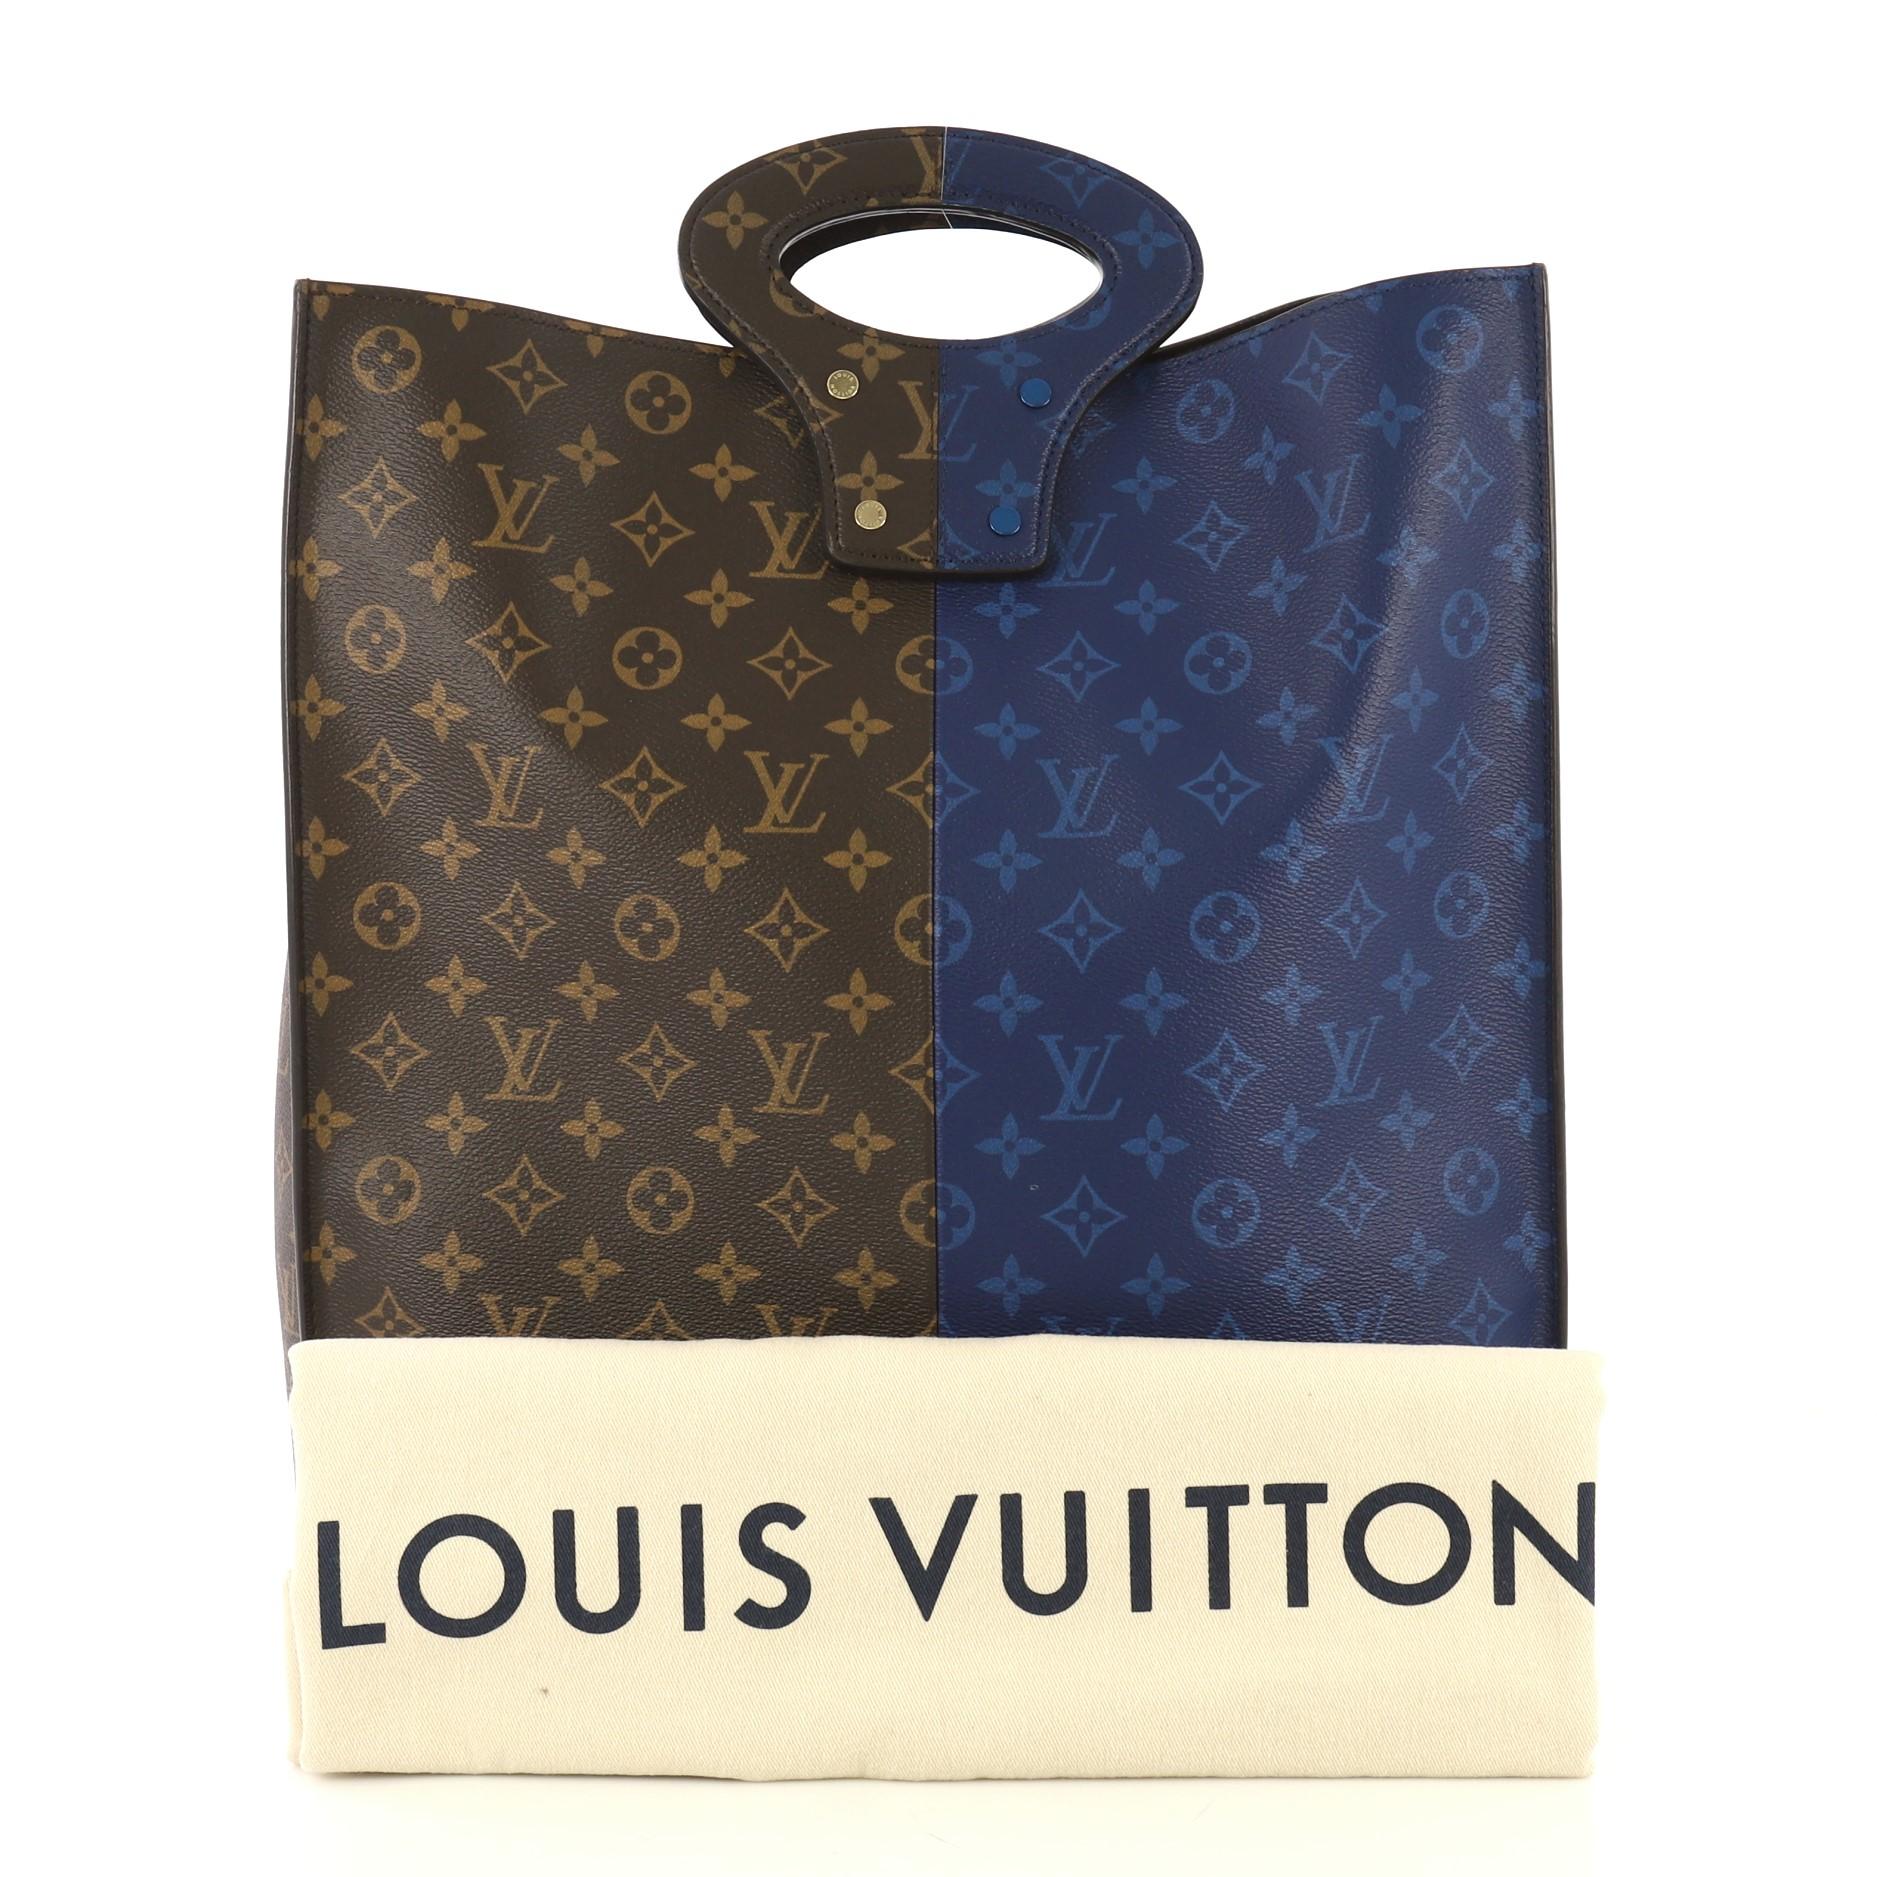 This Louis Vuitton North South Tote Monogram Eclipse Split Canvas, crafted from brown and blue monogram eclipse split coated canvas, features dual top handles and gold-tone hardware. It opens to a brown microfiber interior with zip compartment.